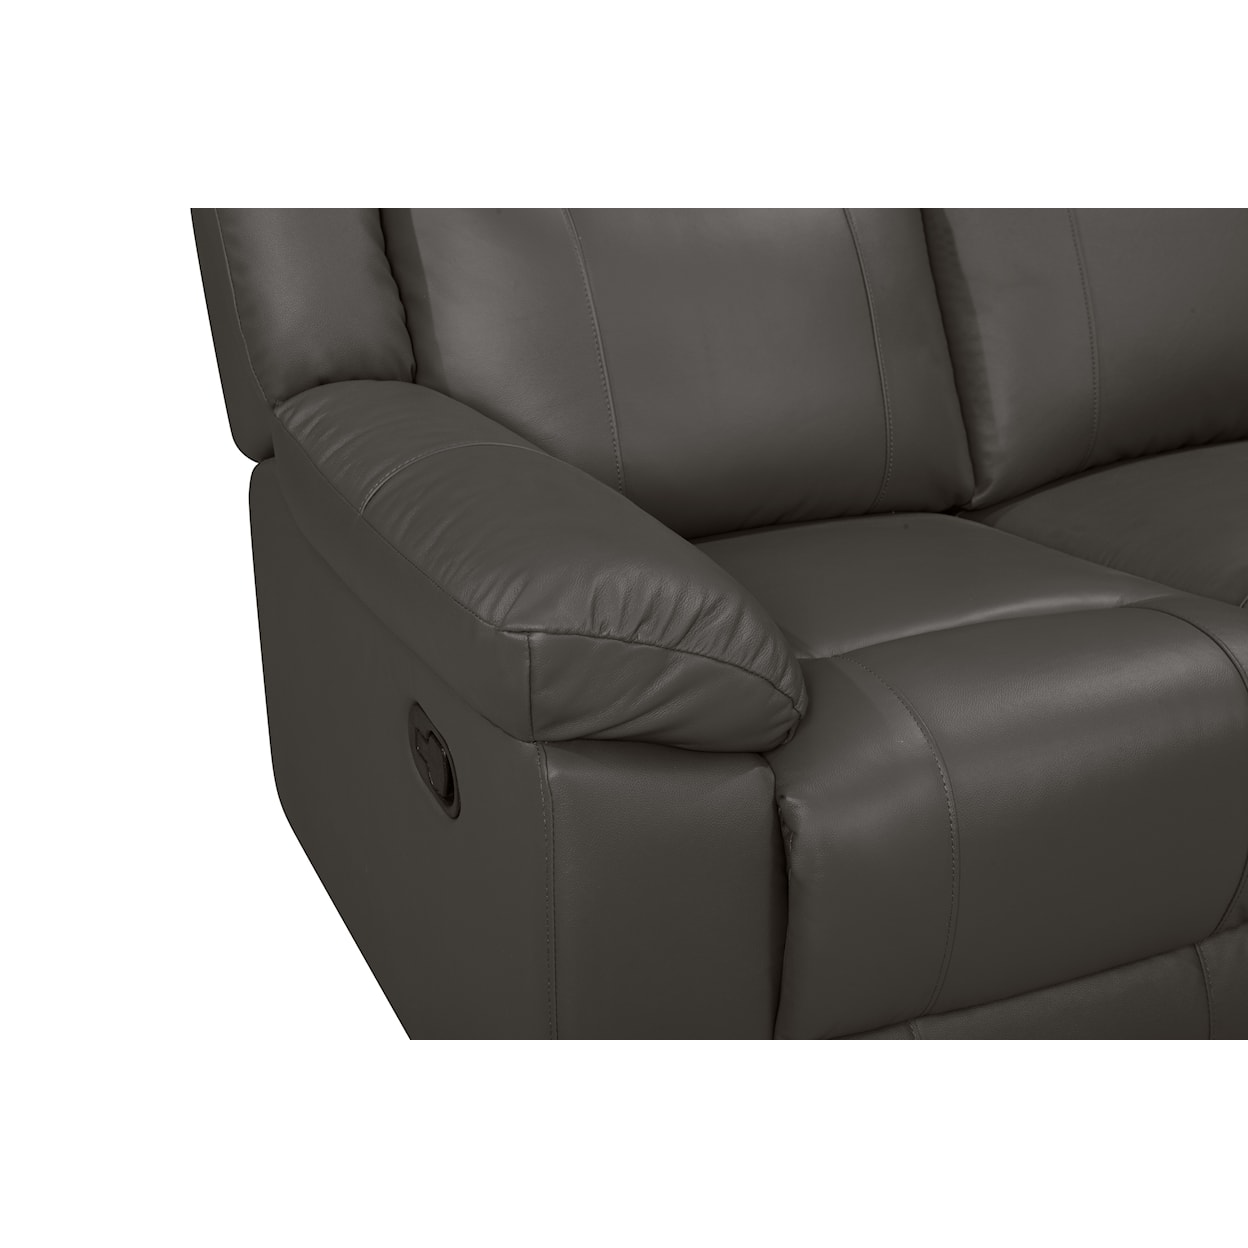 New Classic Taggart Leather Loveseat W/ Dual Recliners